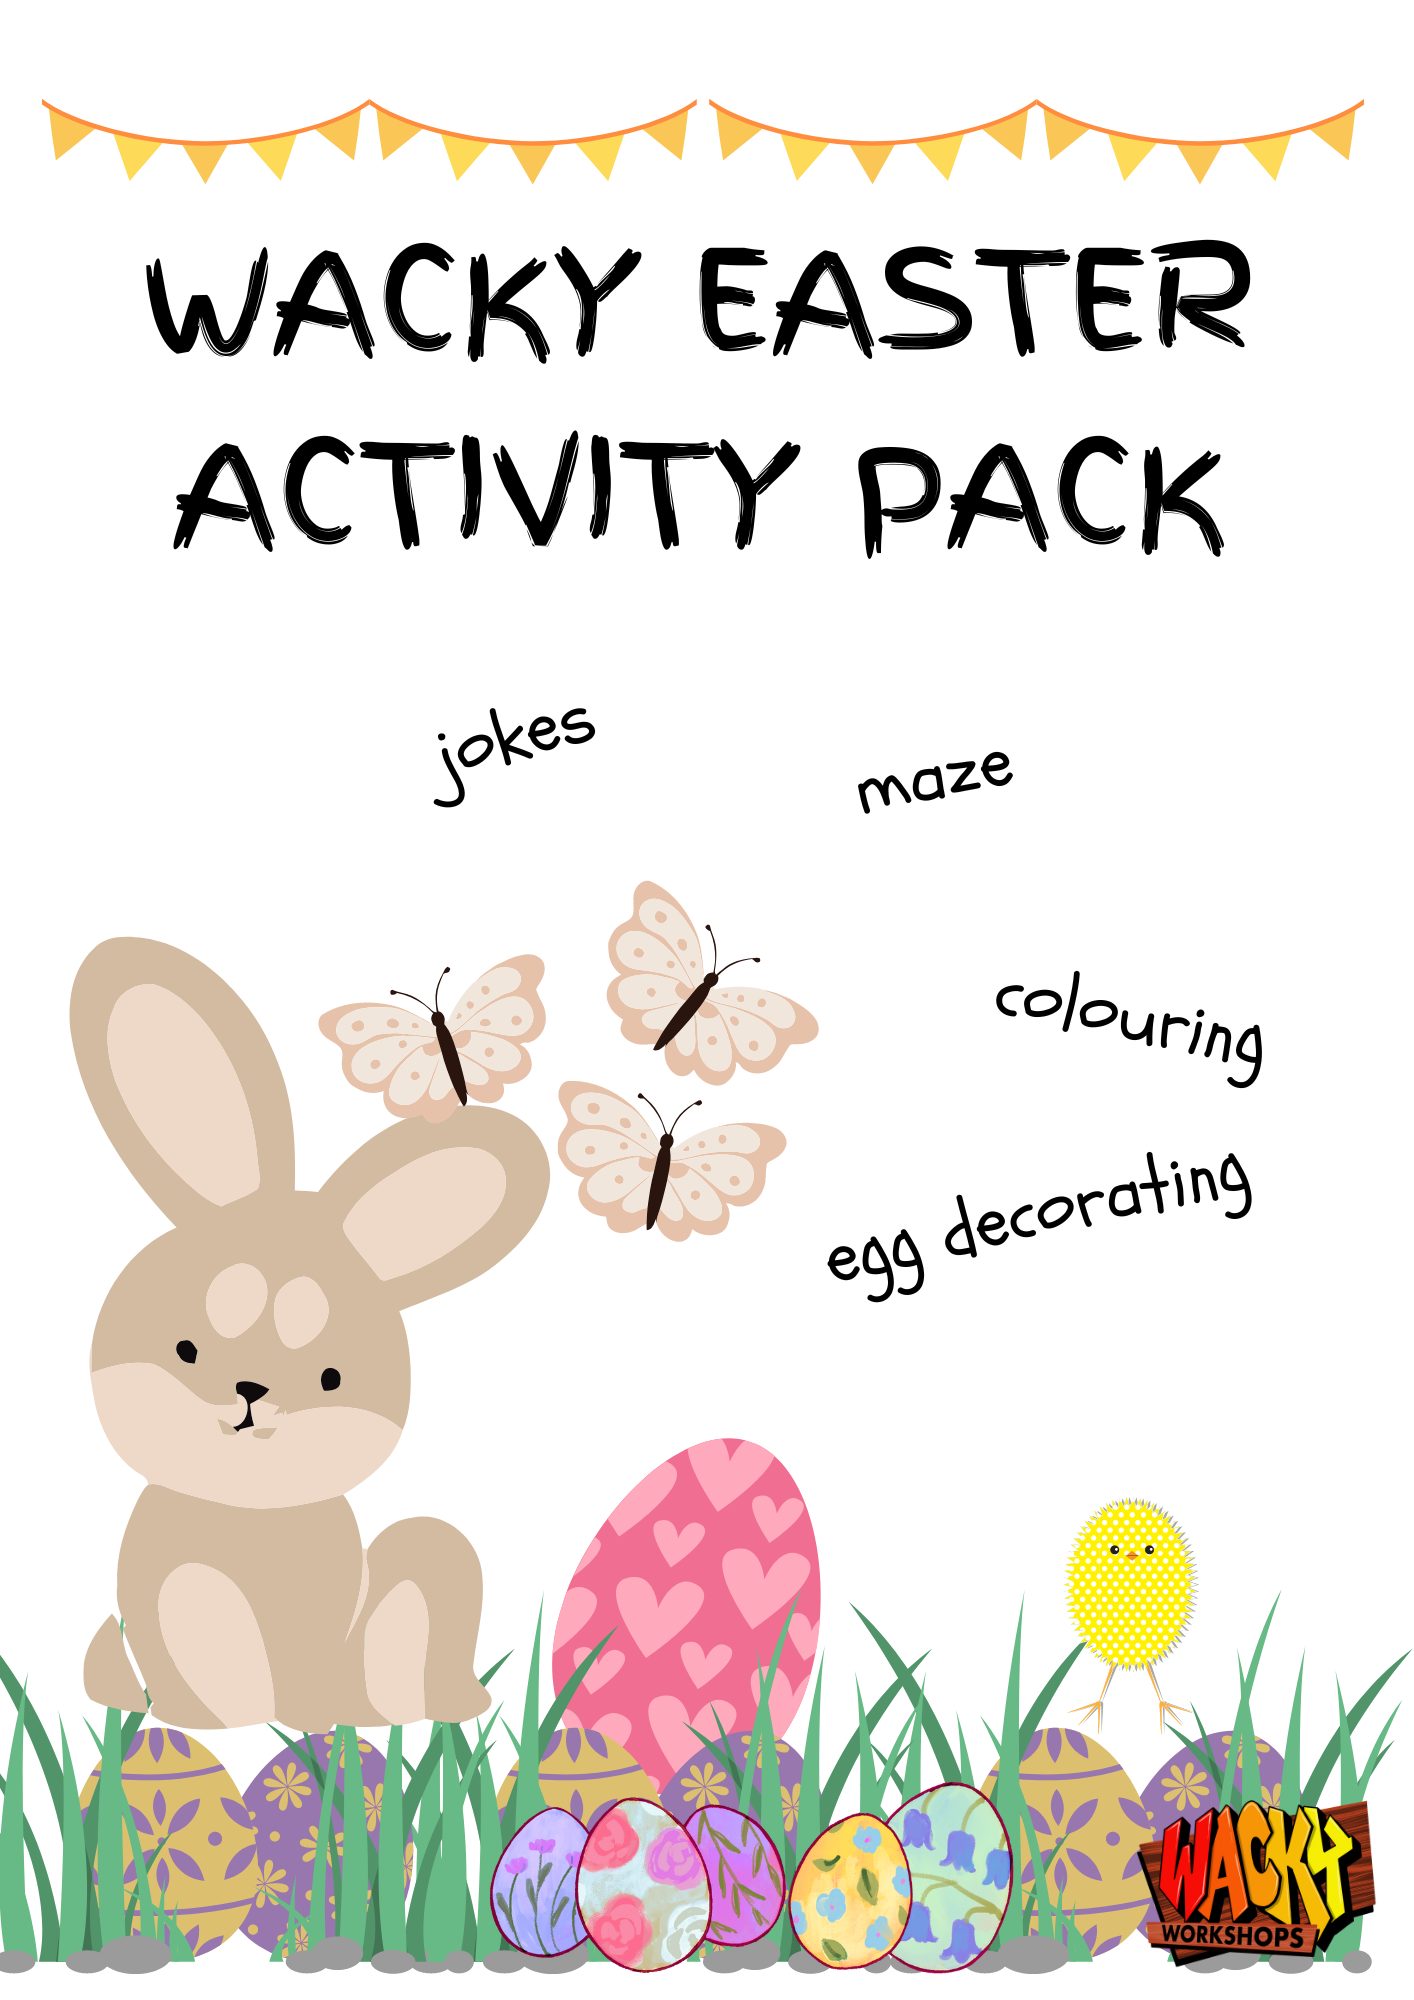 Wacky Easter Activity Pack picture